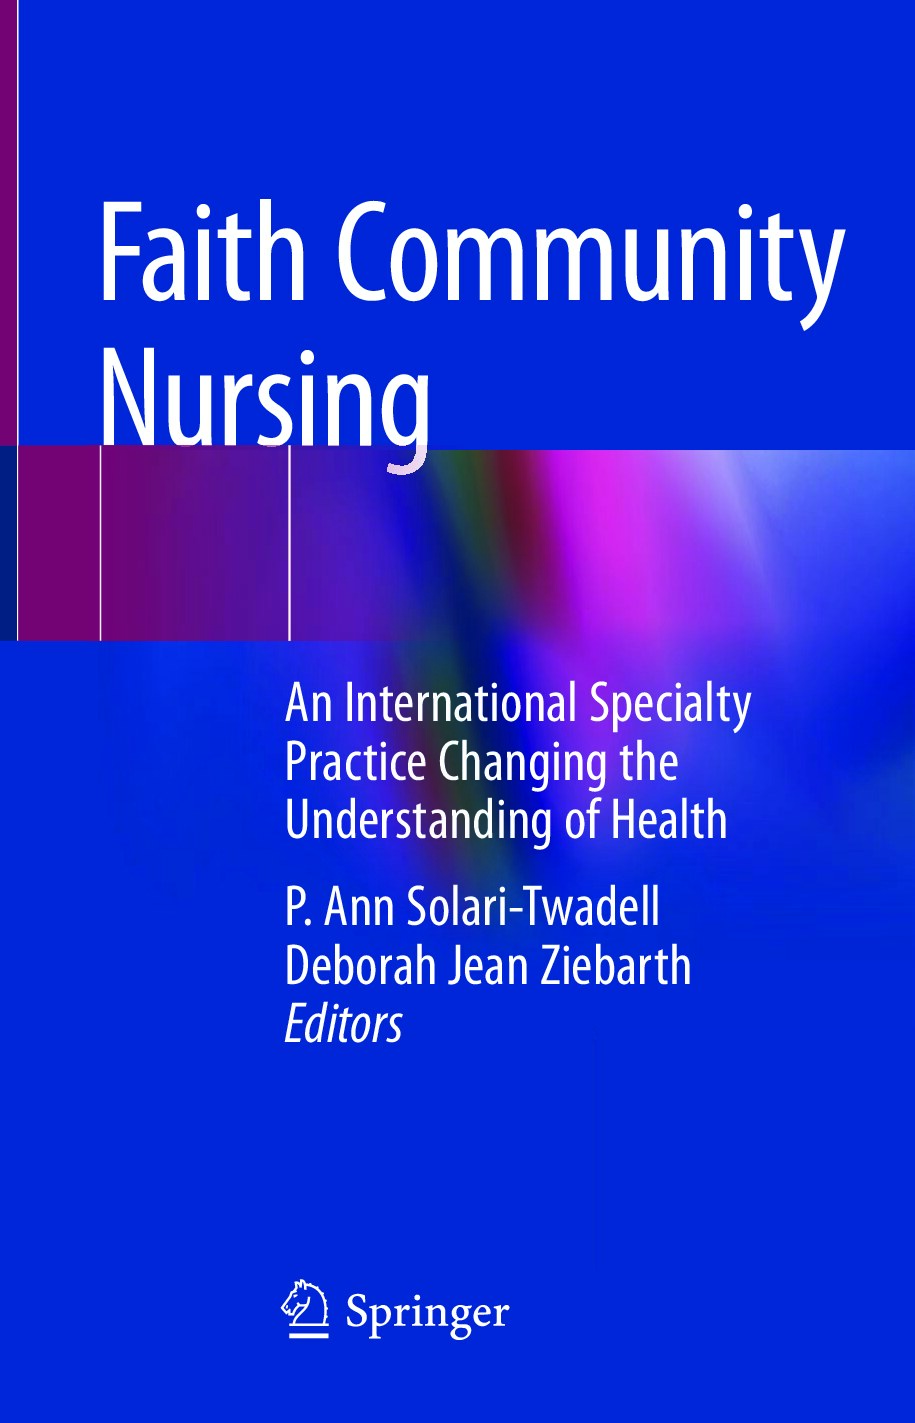 An International Specialty Practice Changing the Understanding of Health (2020)